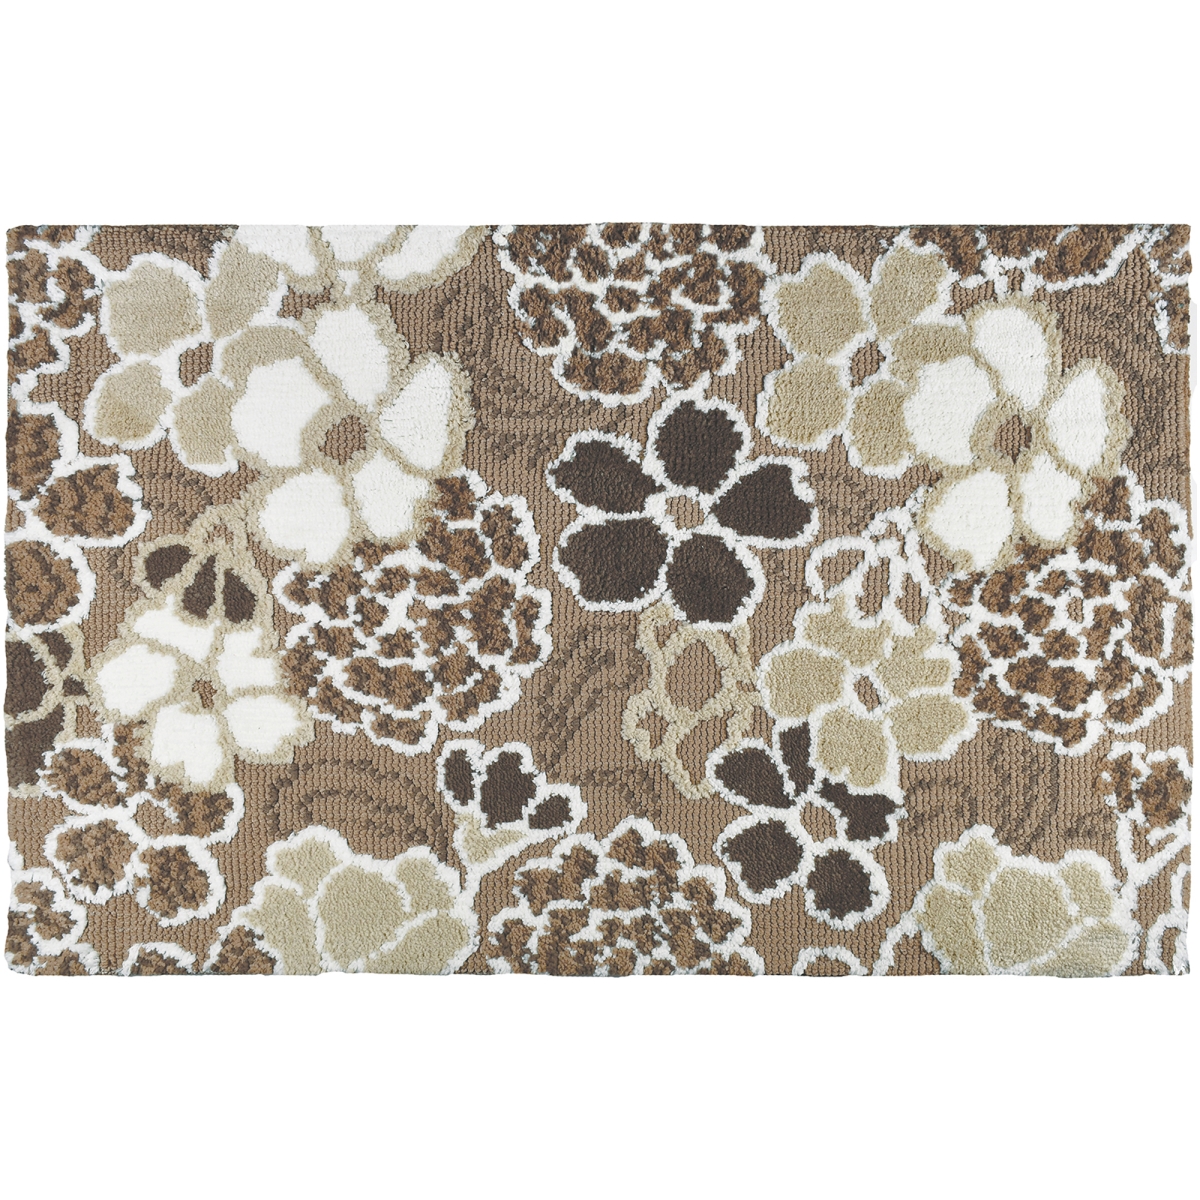 Ss-jsm002b 21 X 33 In. Sweetheart Floral Accent Rug